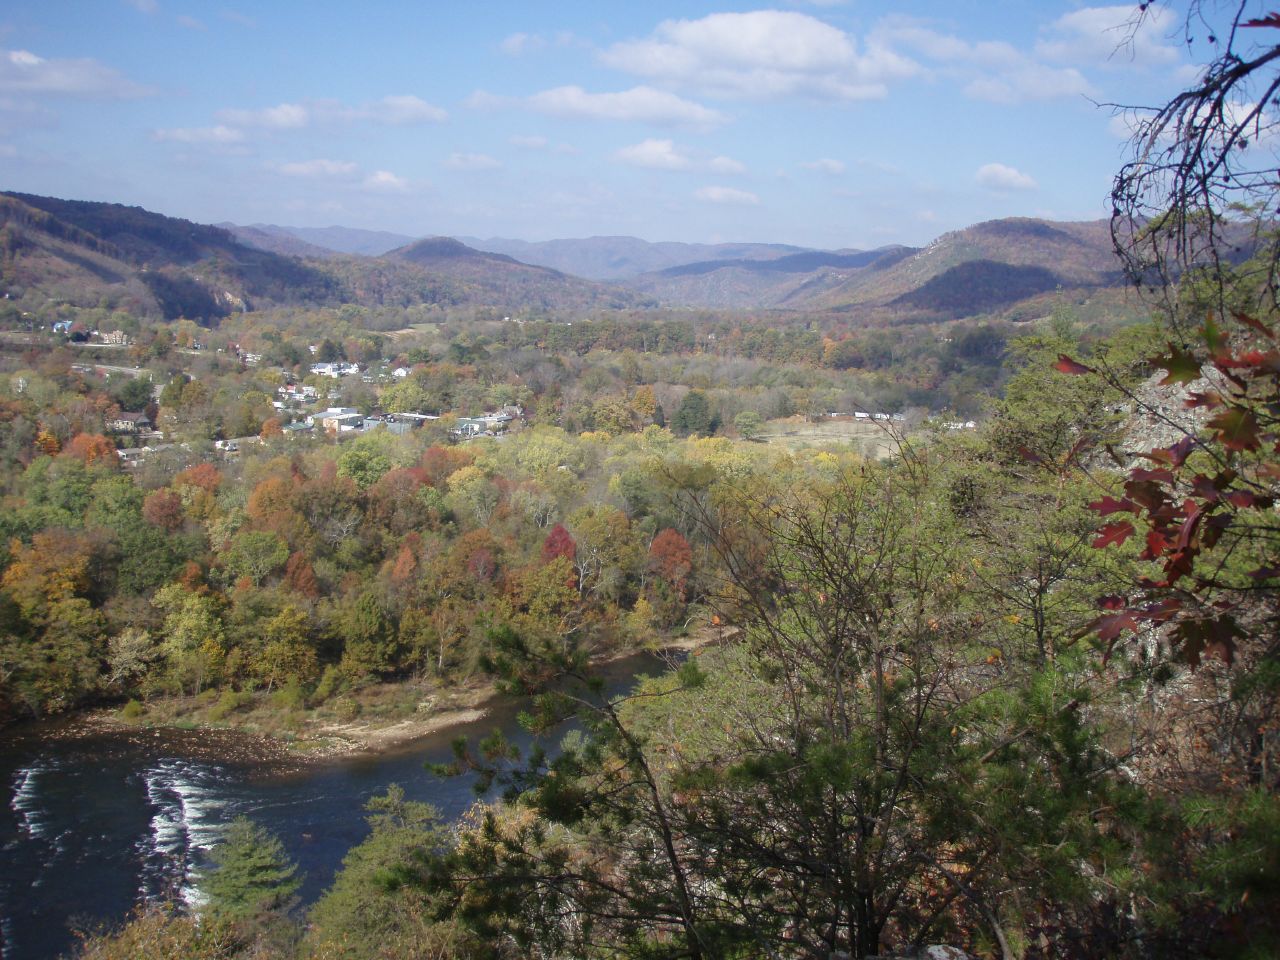 A view of Hot Springs, NC